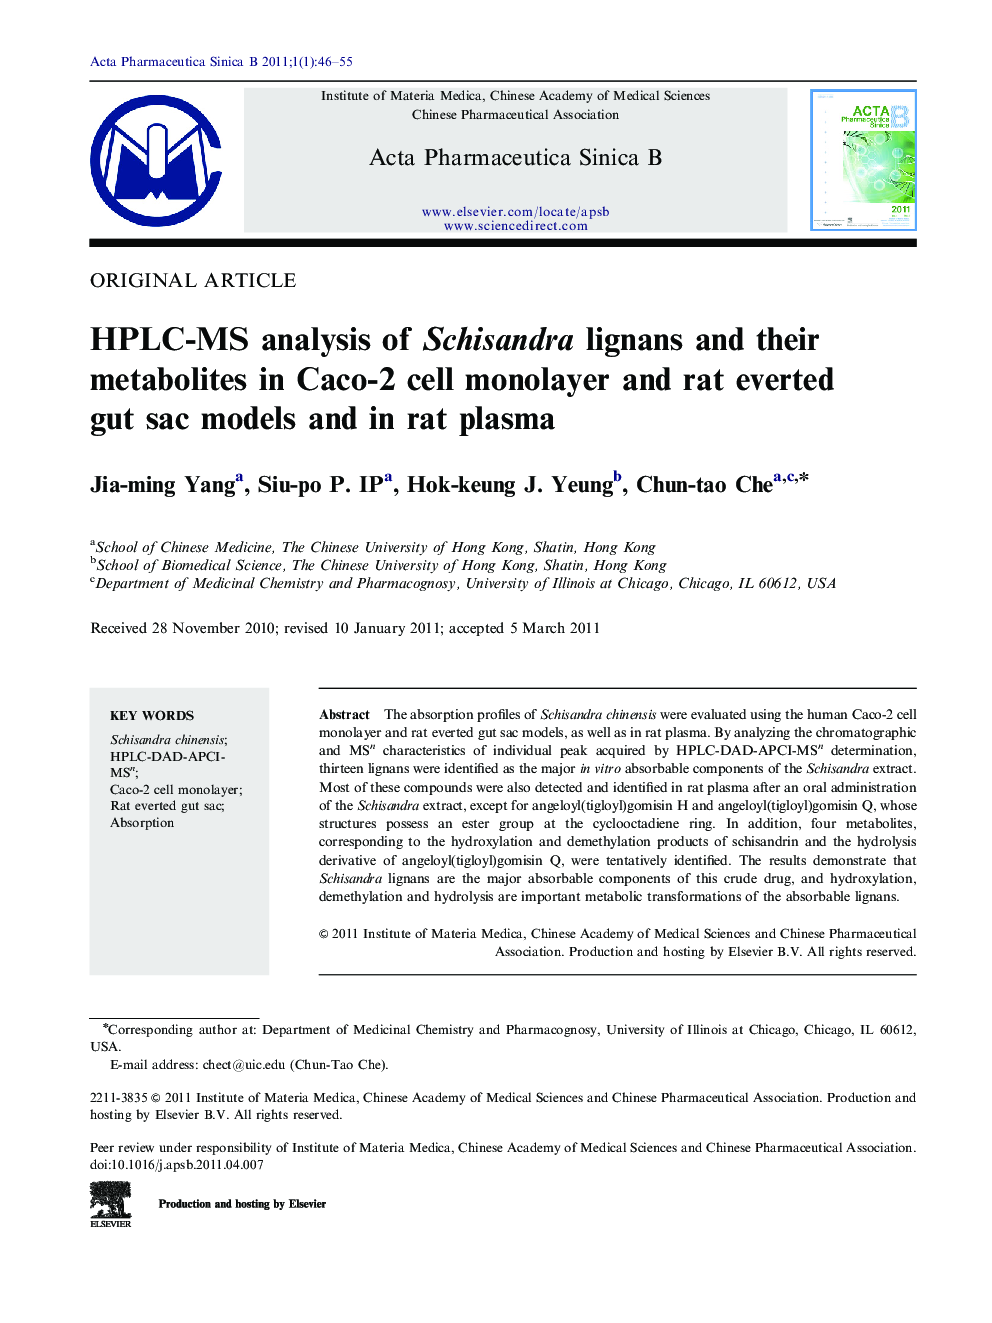 HPLC-MS analysis of Schisandra lignans and their metabolites in Caco-2 cell monolayer and rat everted gut sac models and in rat plasma